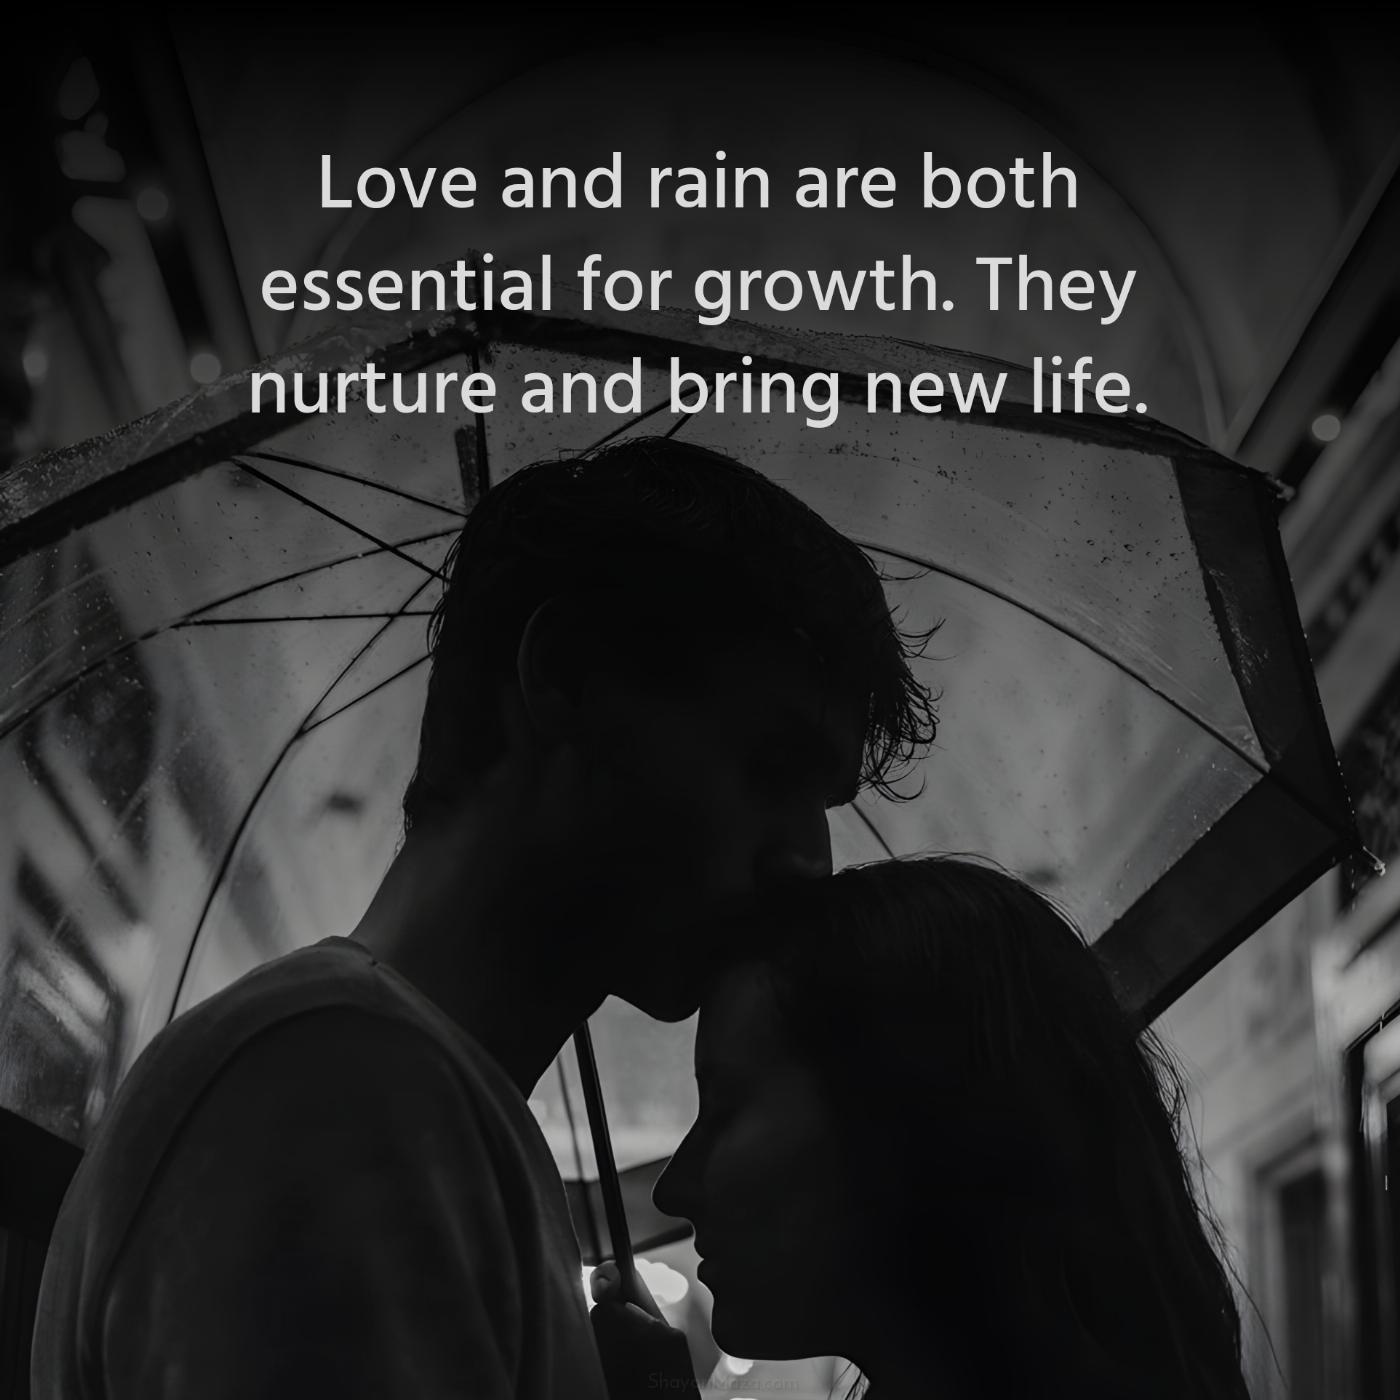 Love and rain are both essential for growth